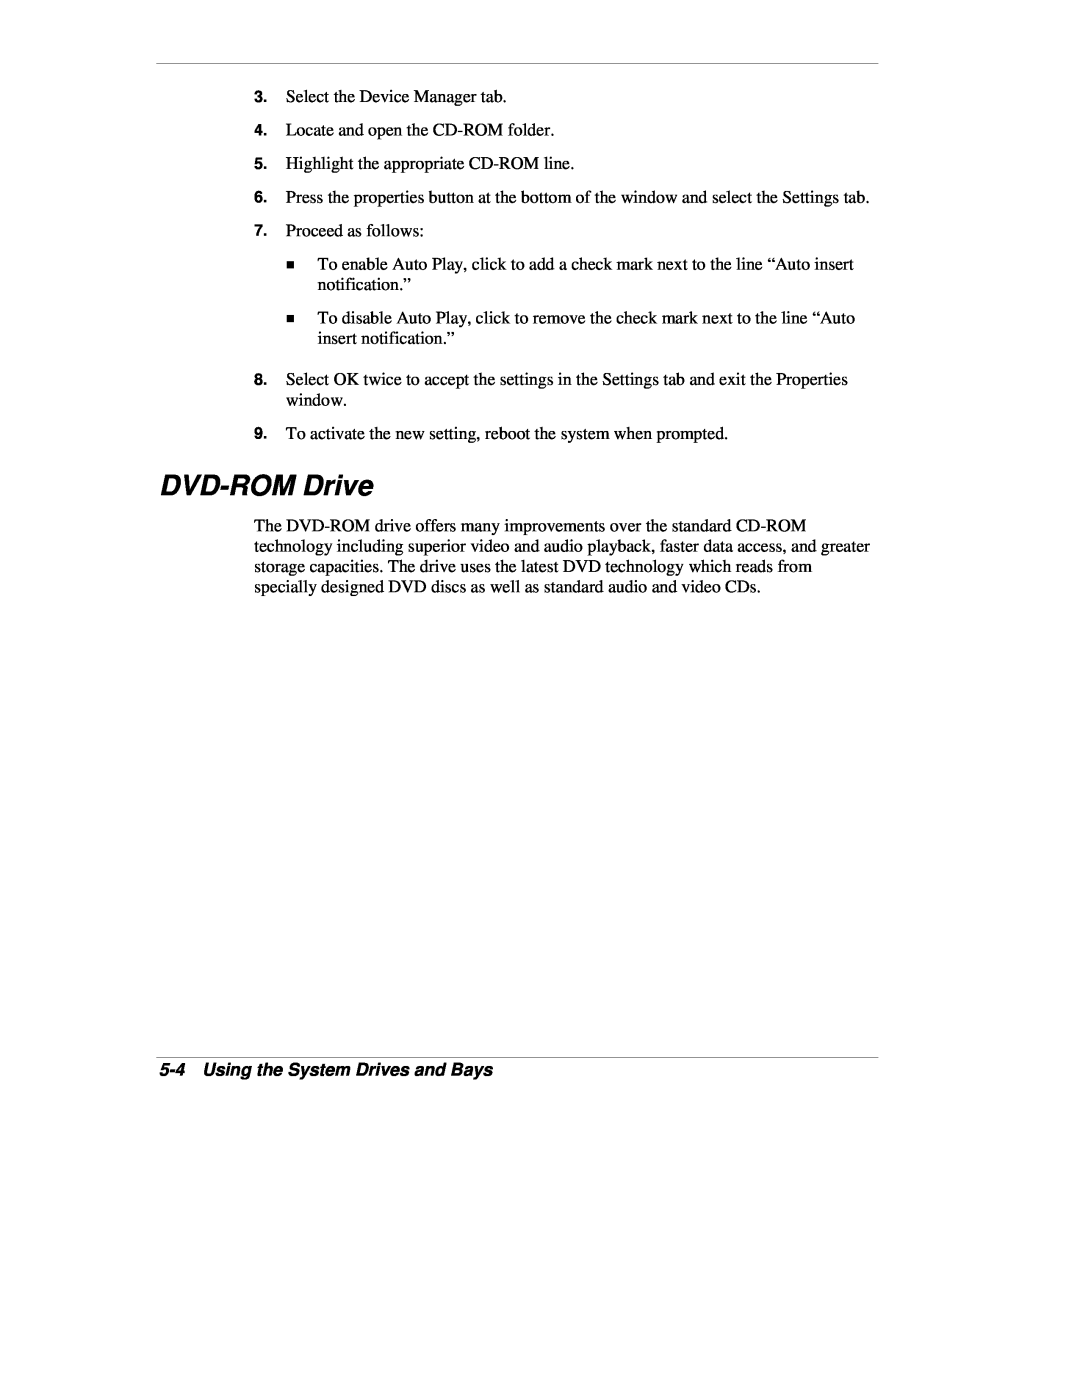 NEC VX manual DVD-ROM Drive, Using the System Drives and Bays 